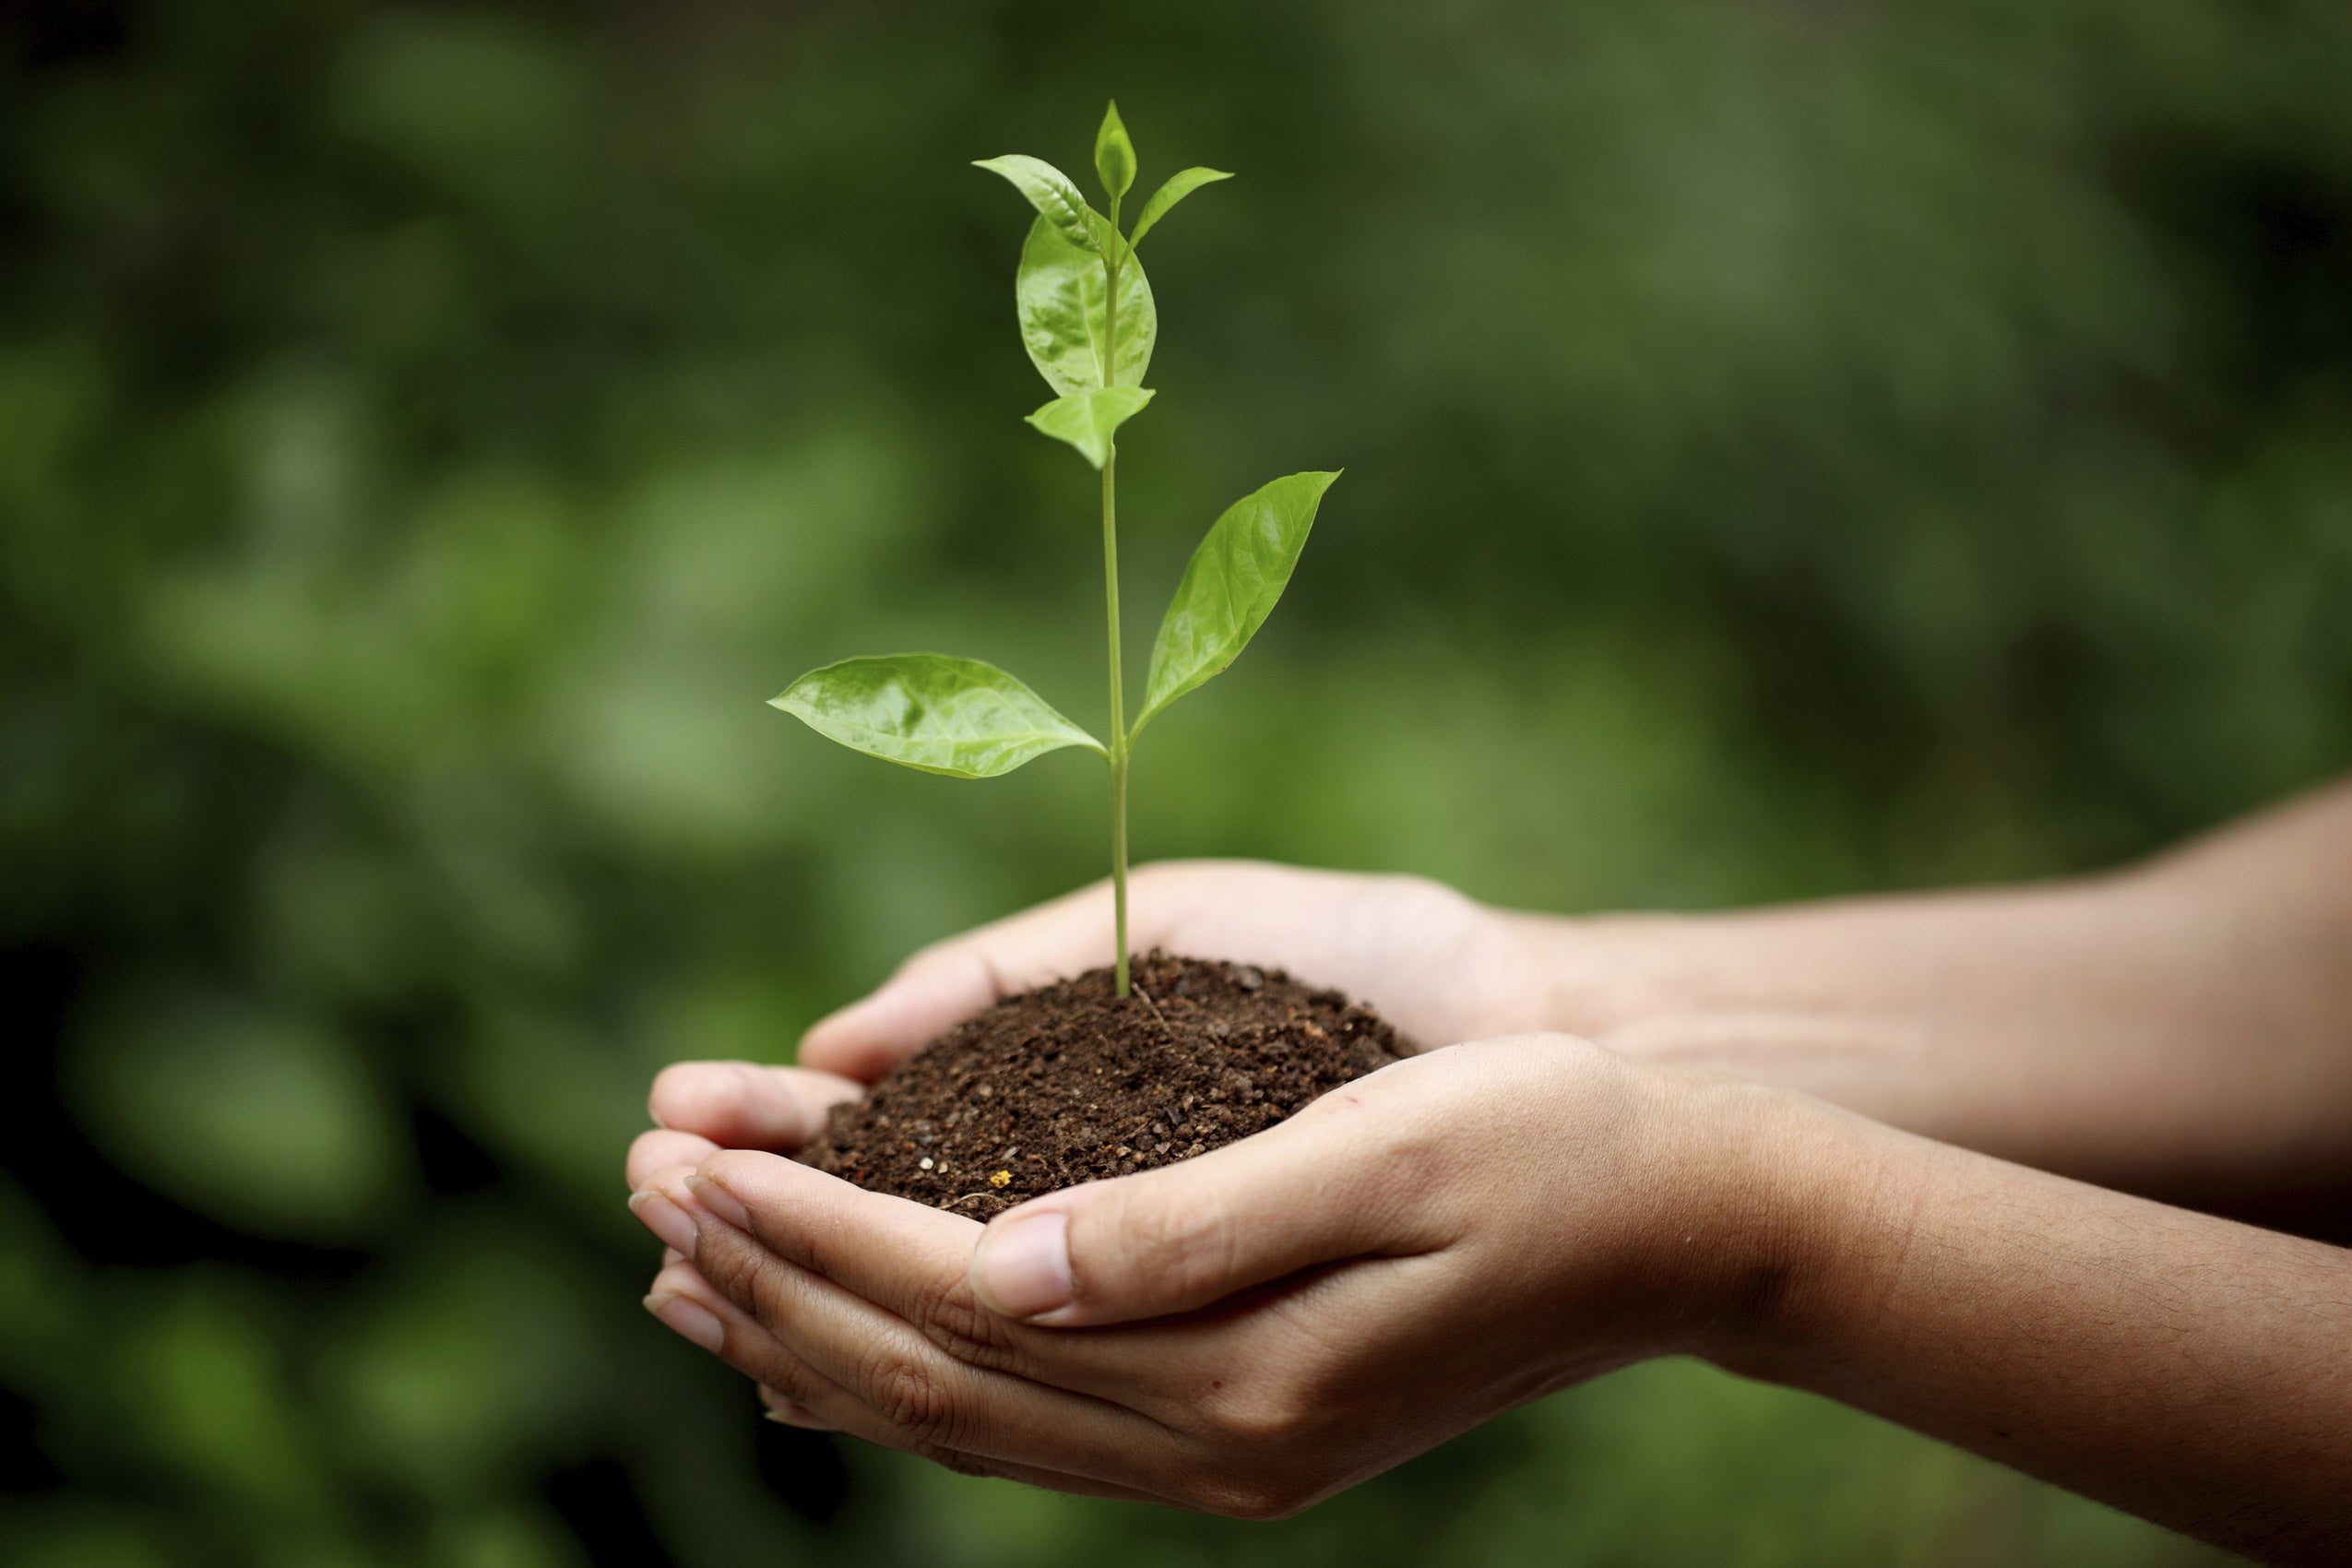 stock photo of hands holding a seedling growing in dirt